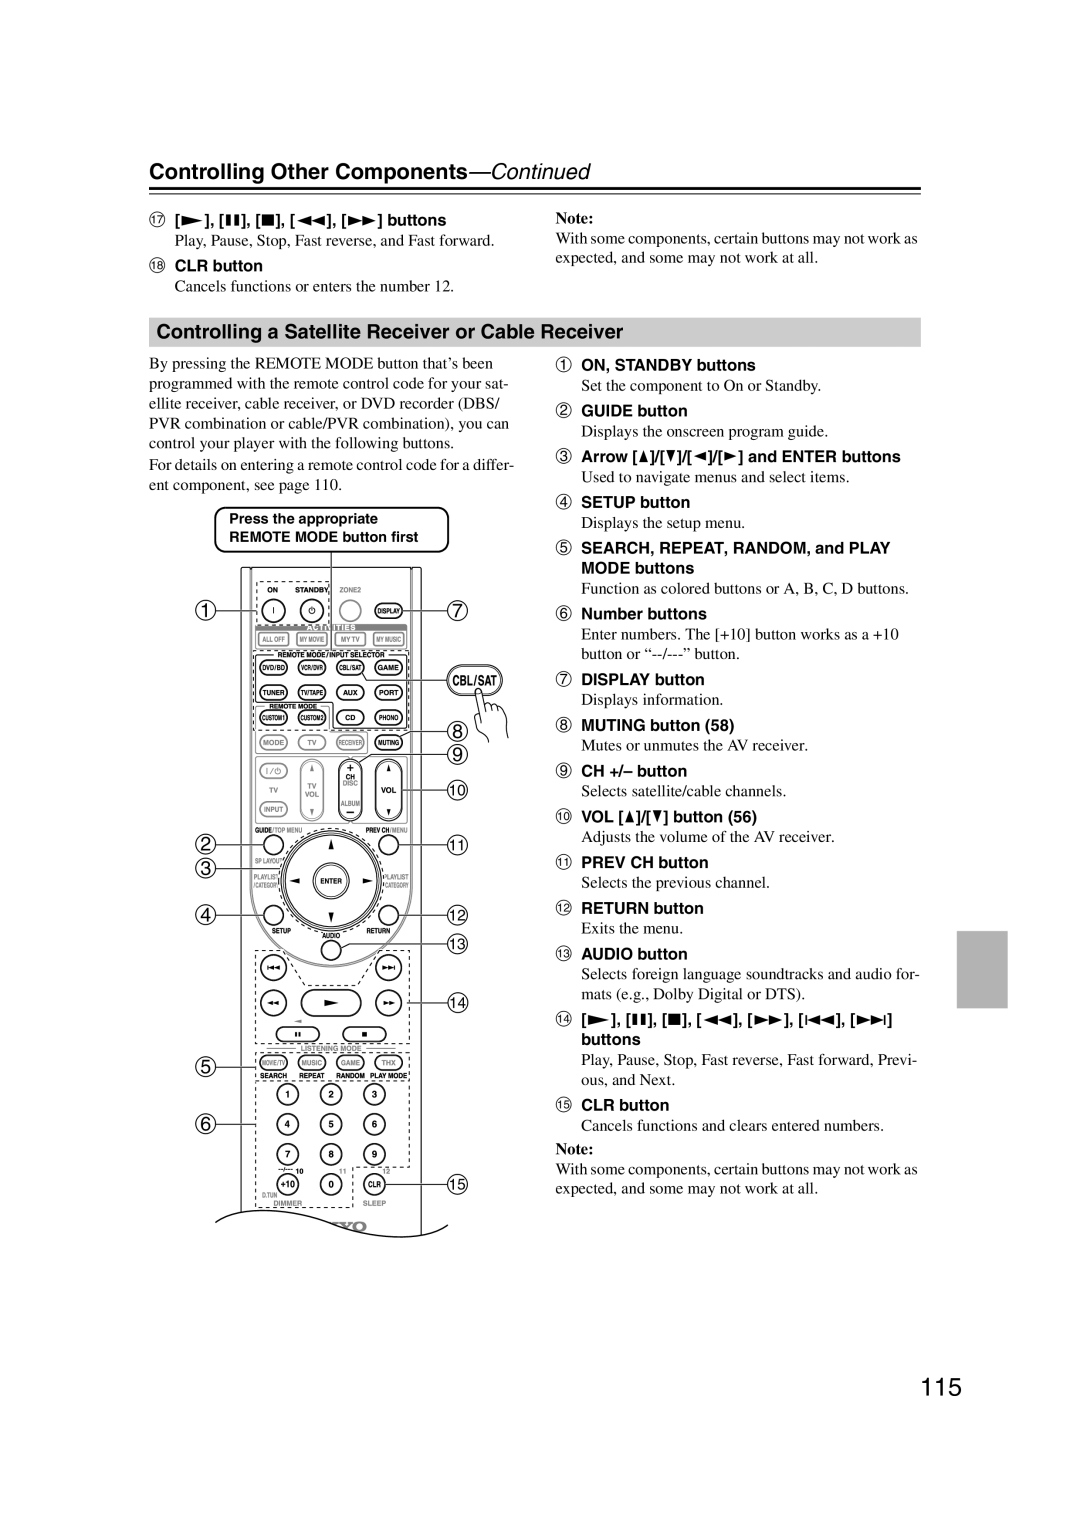 Onkyo TX-SR707 instruction manual ag h i j bk c dl m n, Controlling Other Components—Continued 